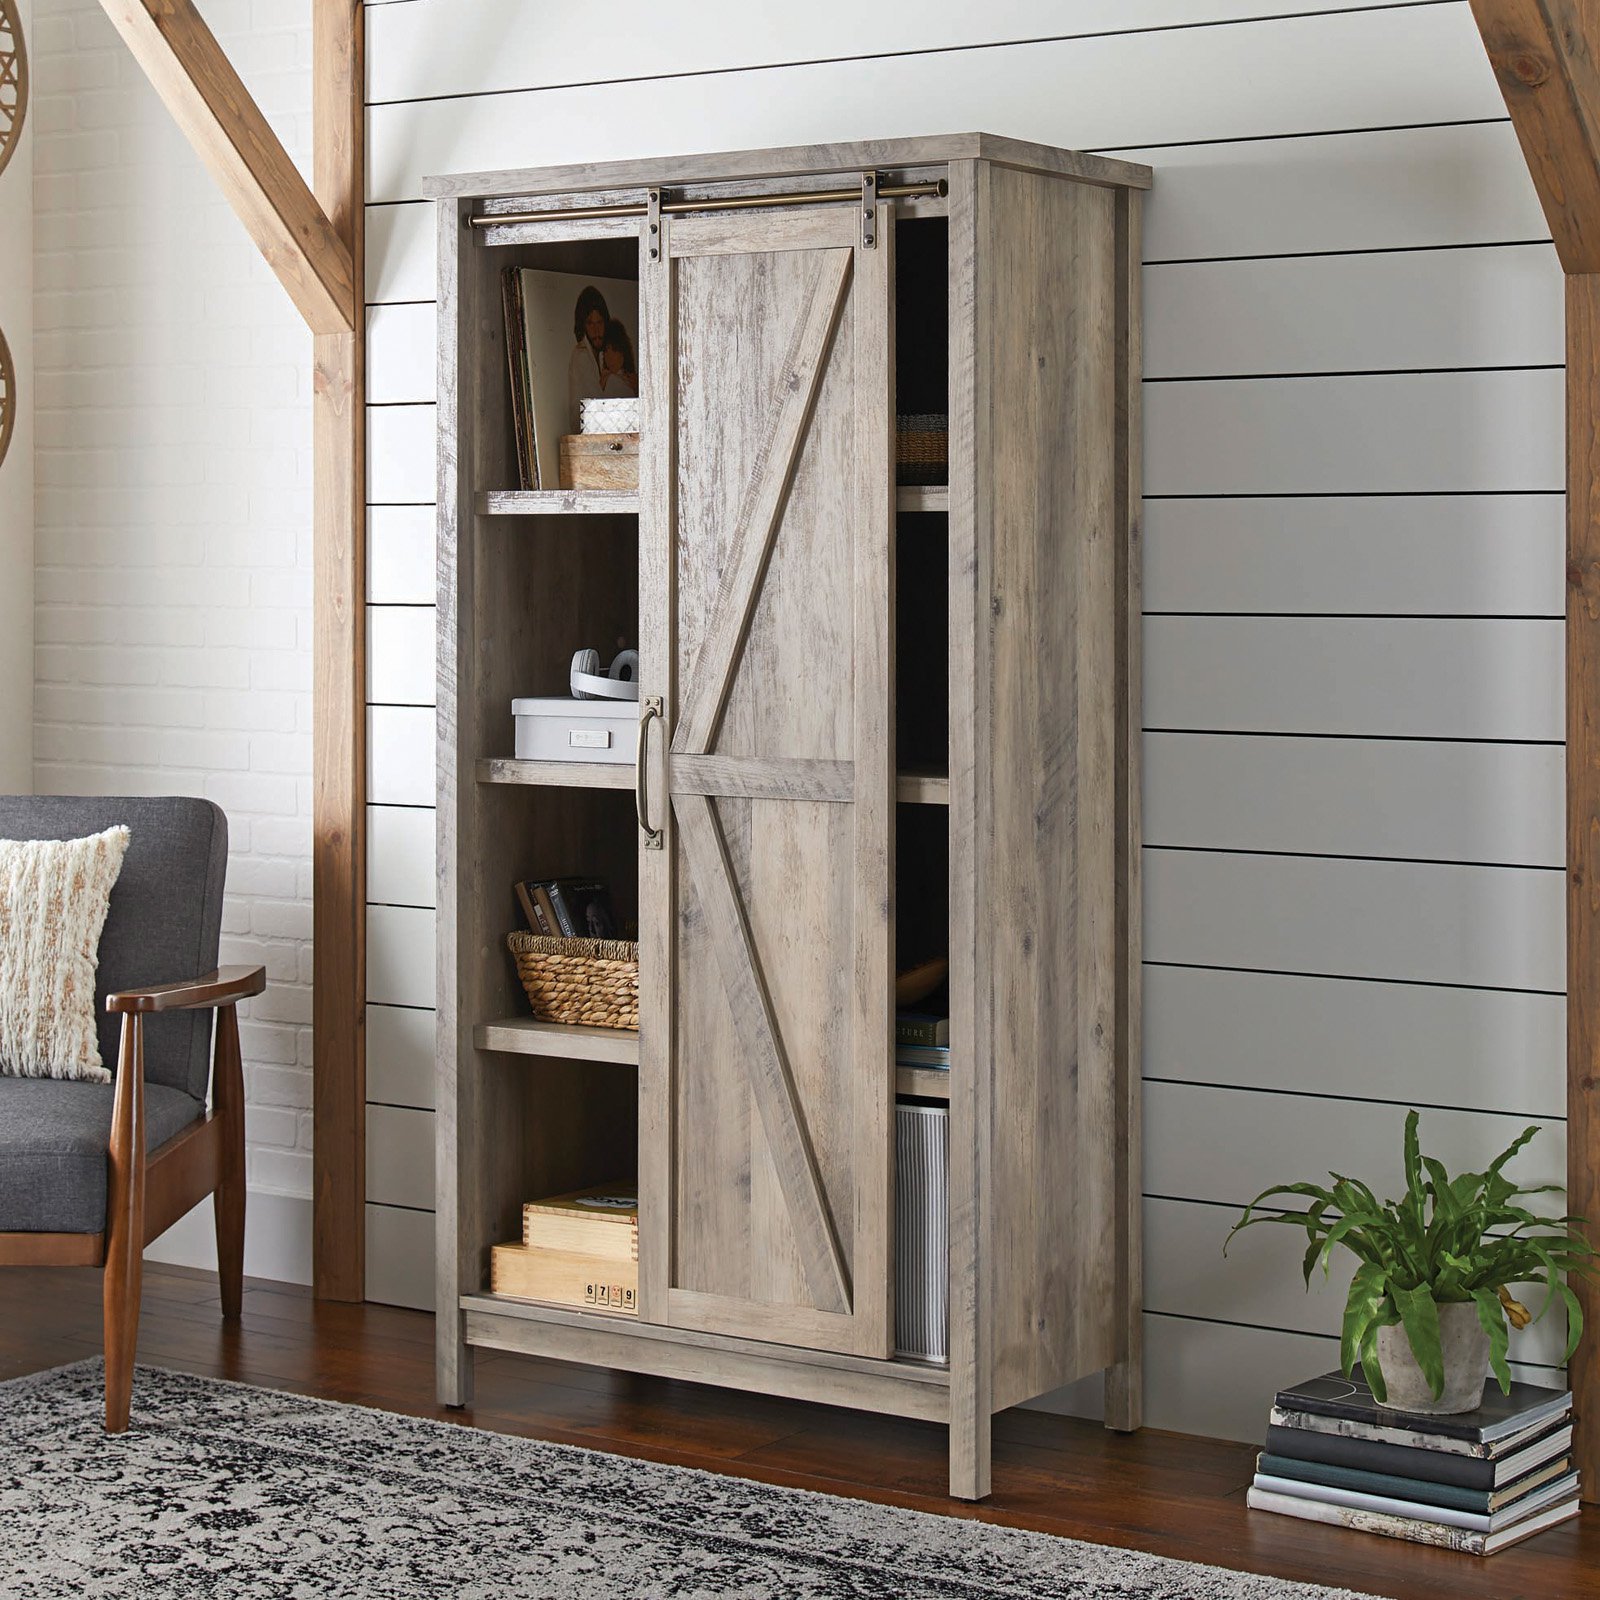 Better Homes & Gardens 66" Modern Farmhouse Bookcase Storage Cabinet, Rustic Gray Finish - image 1 of 8